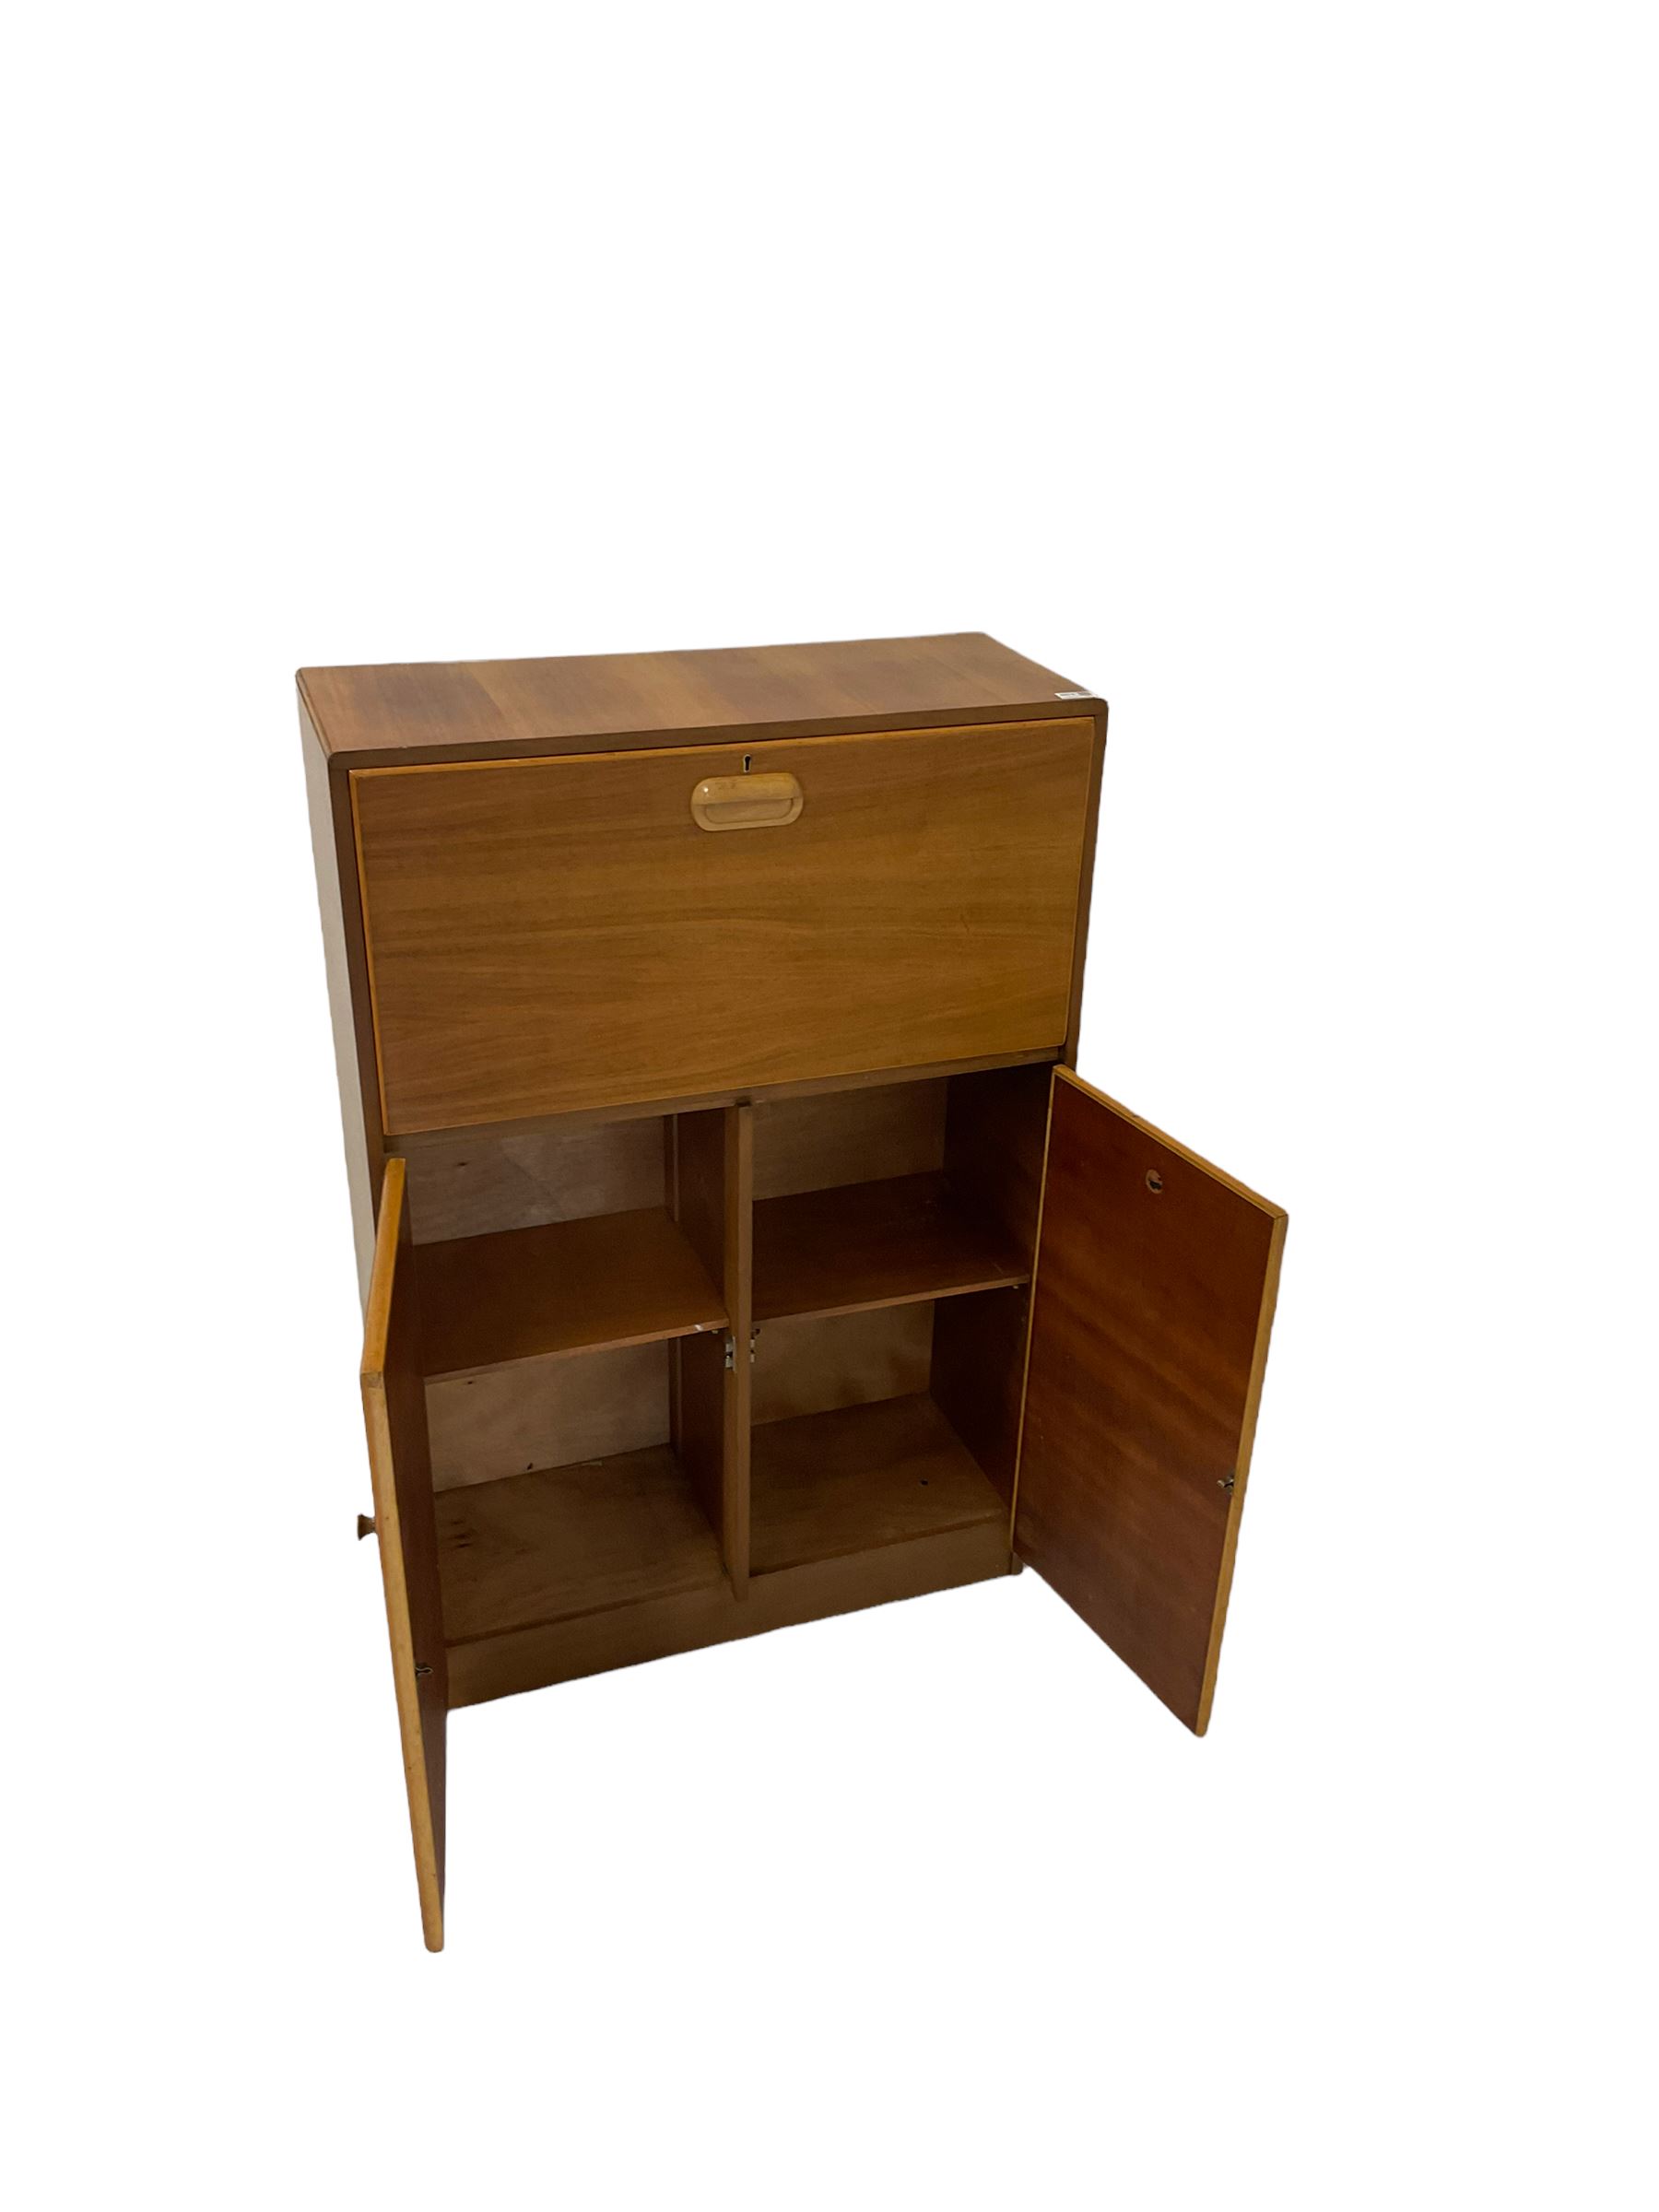 Teak chest with one fall front drawer over two cupboards - Image 4 of 4